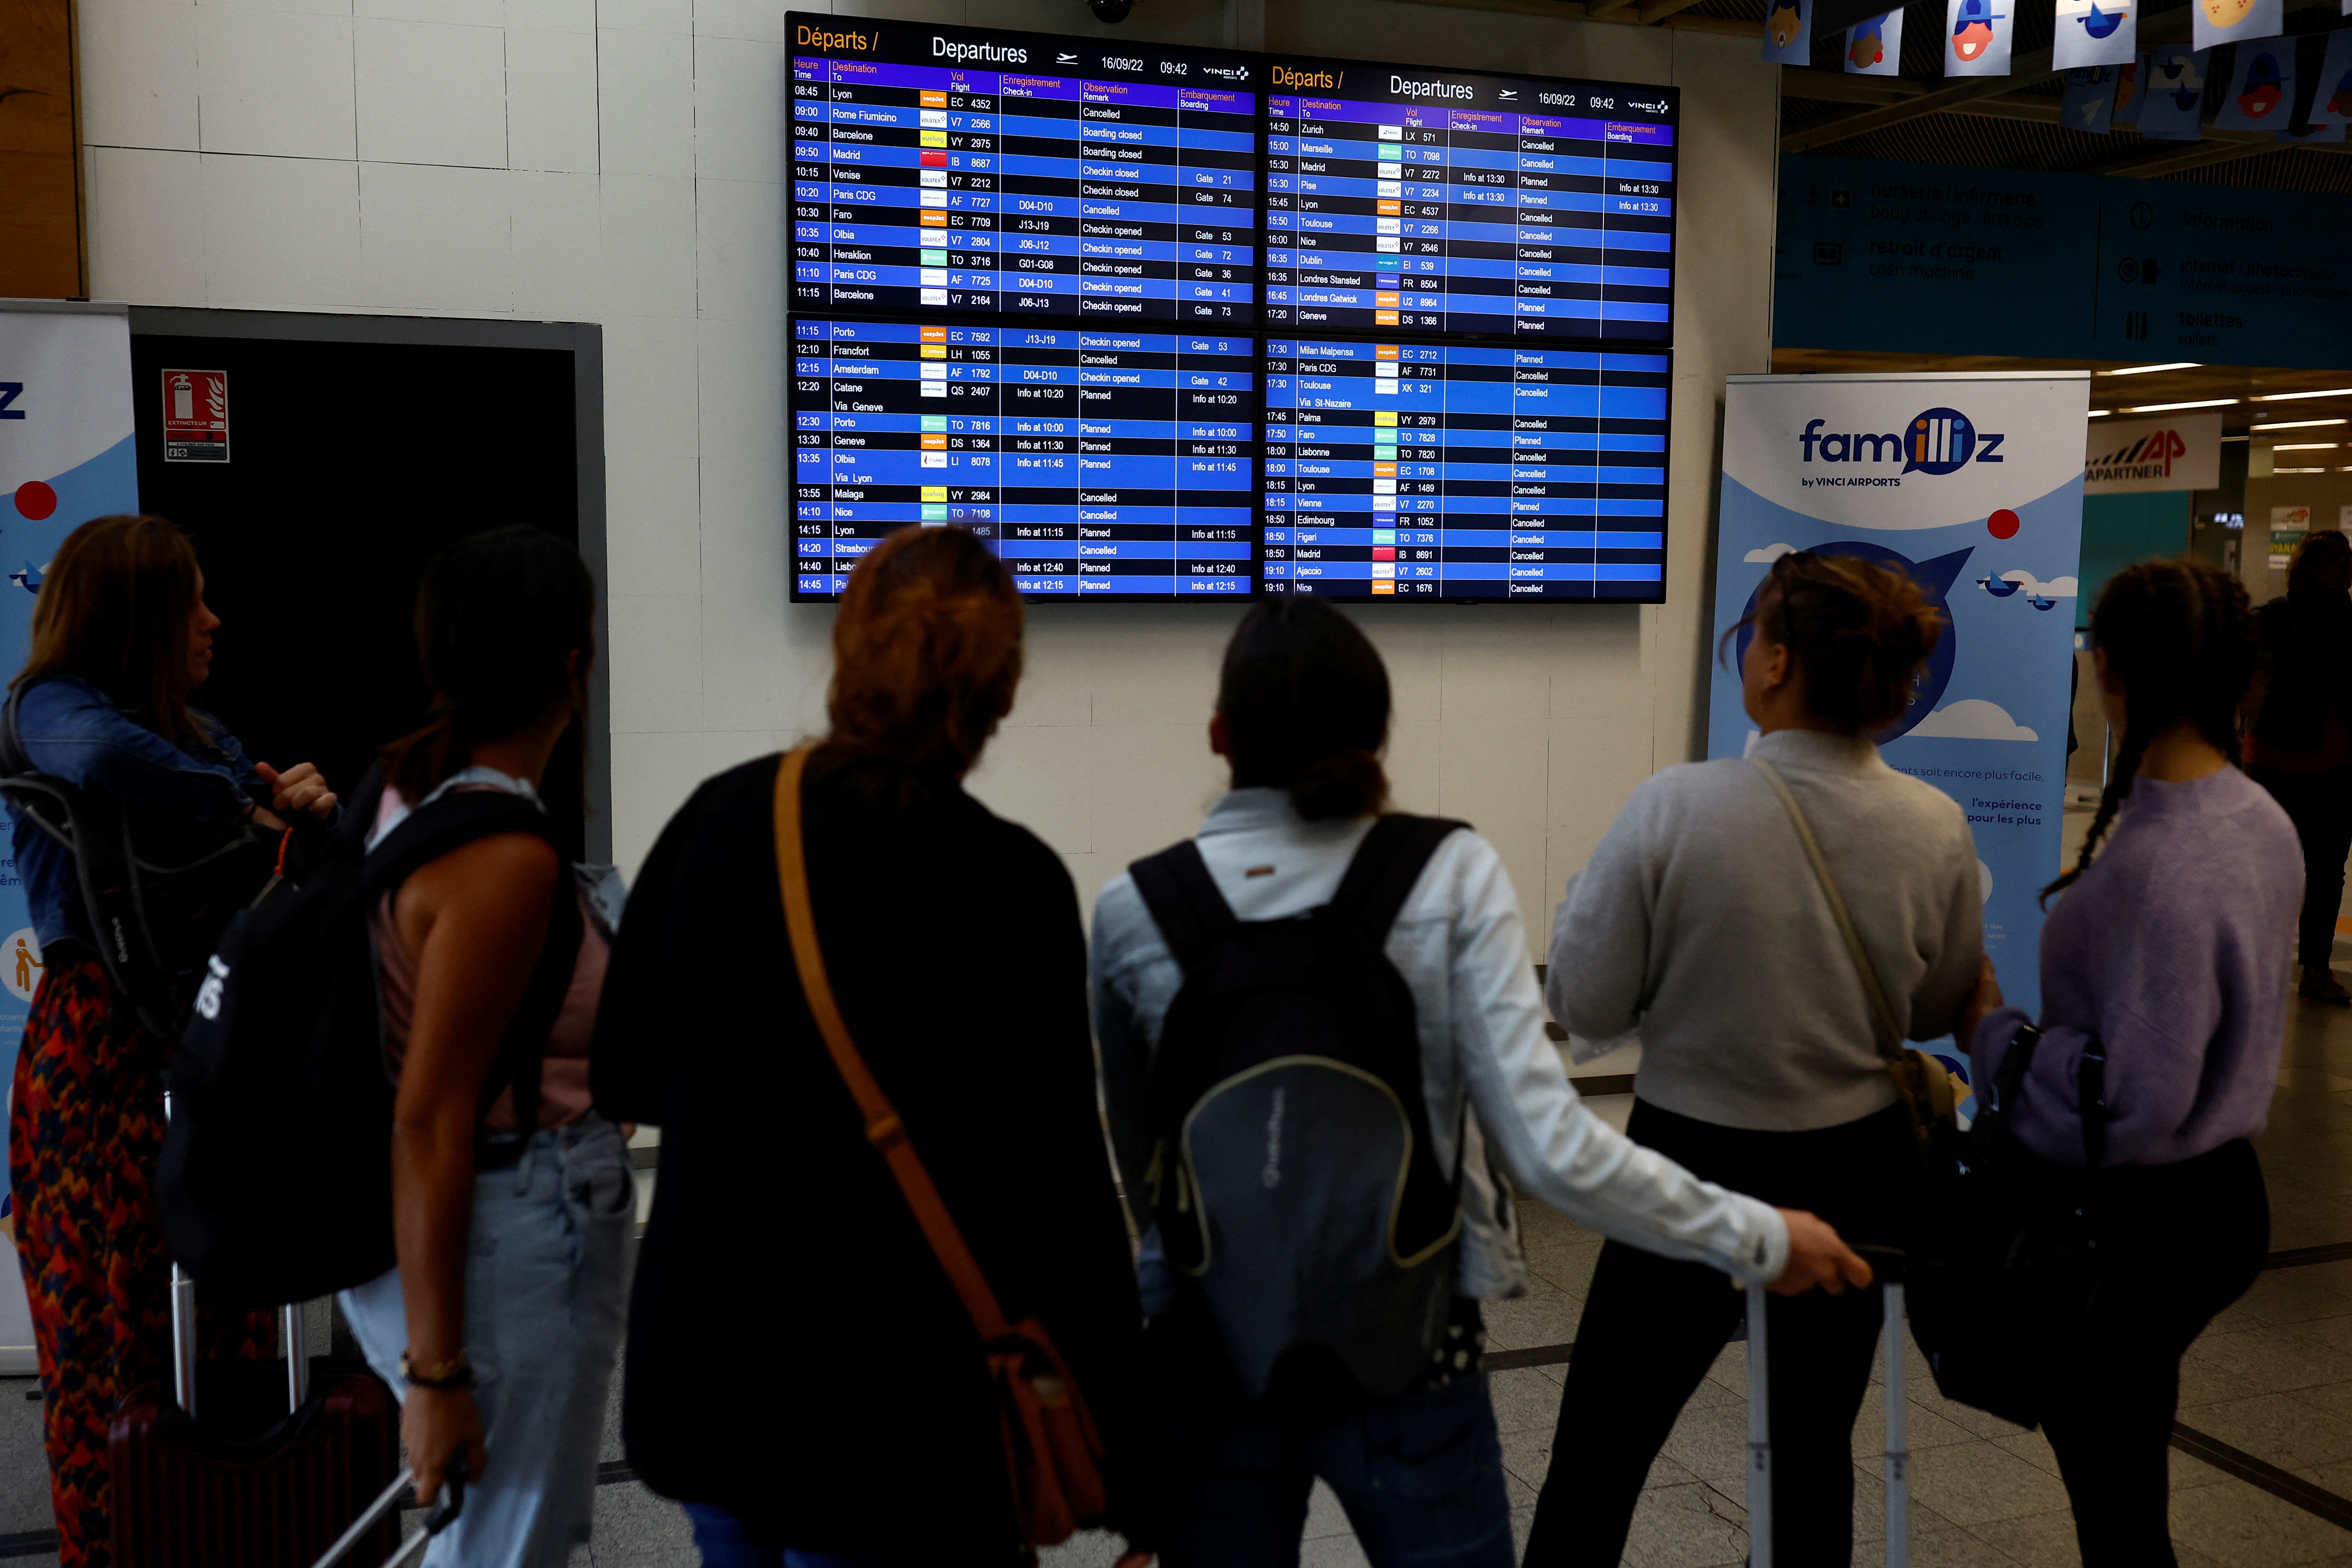 French air traffic controllers go on strike over working conditions